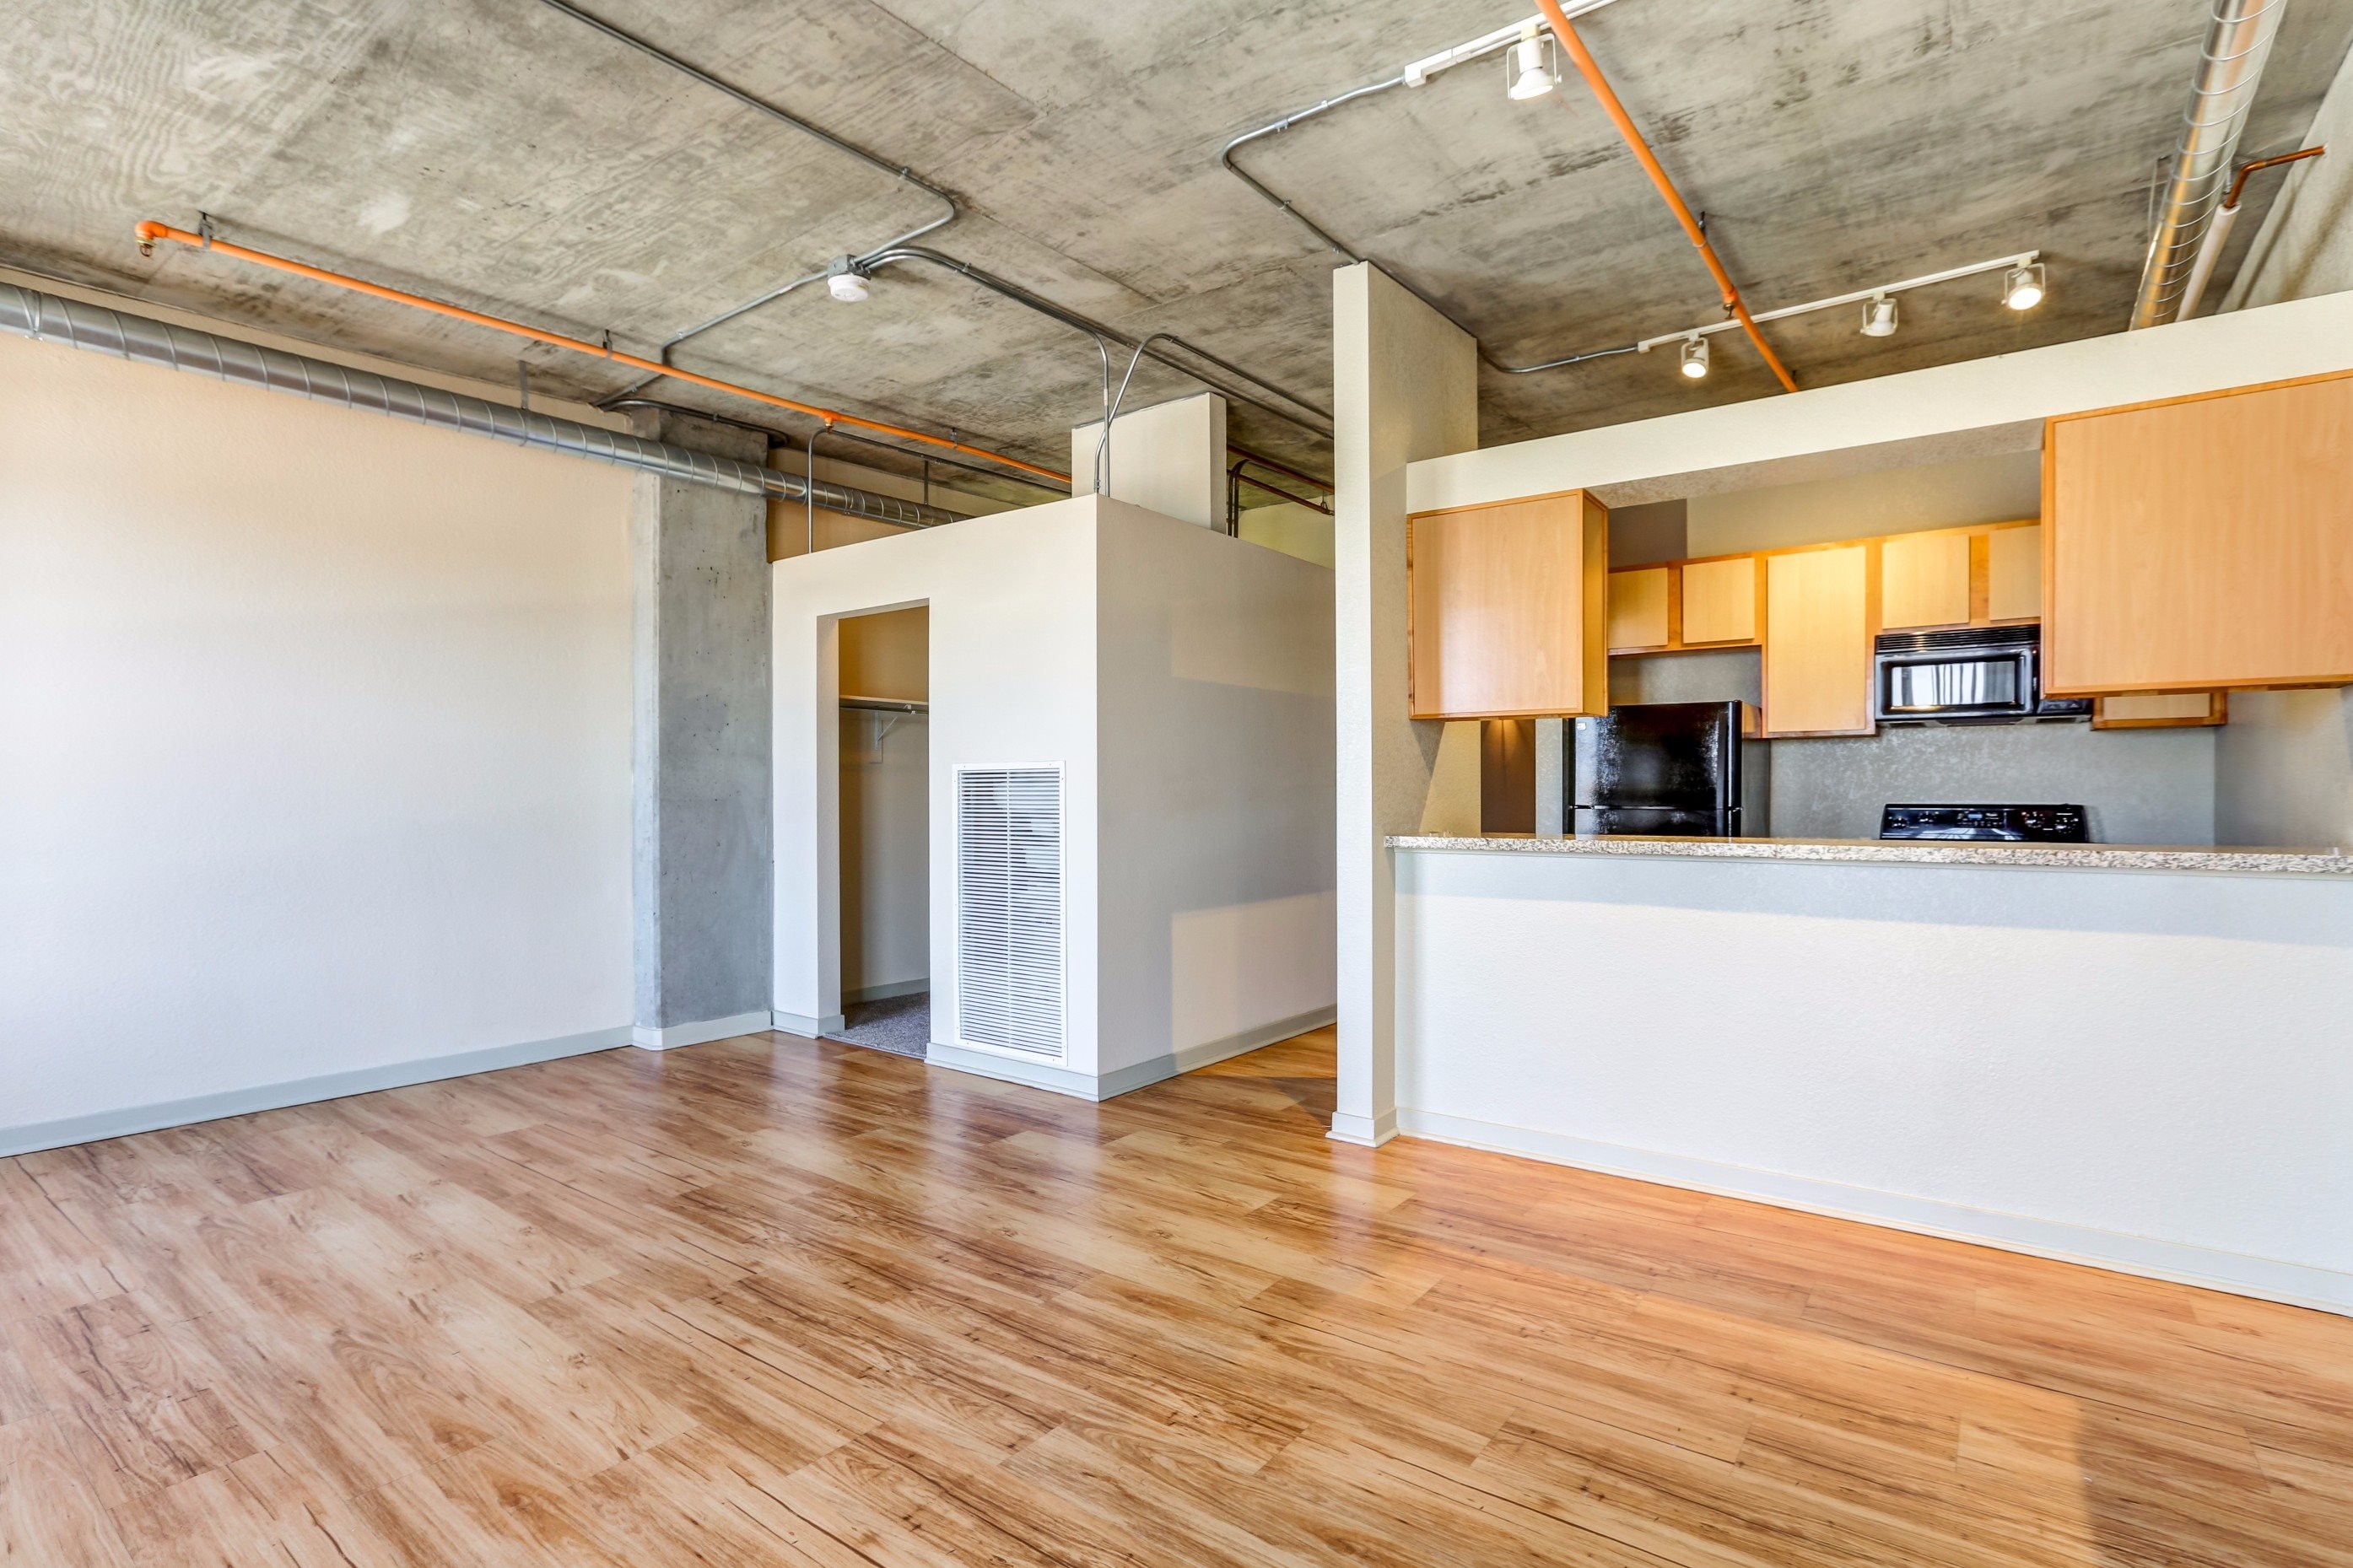 Photos and Video of Ballpark Lofts Apartments in Denver, CO